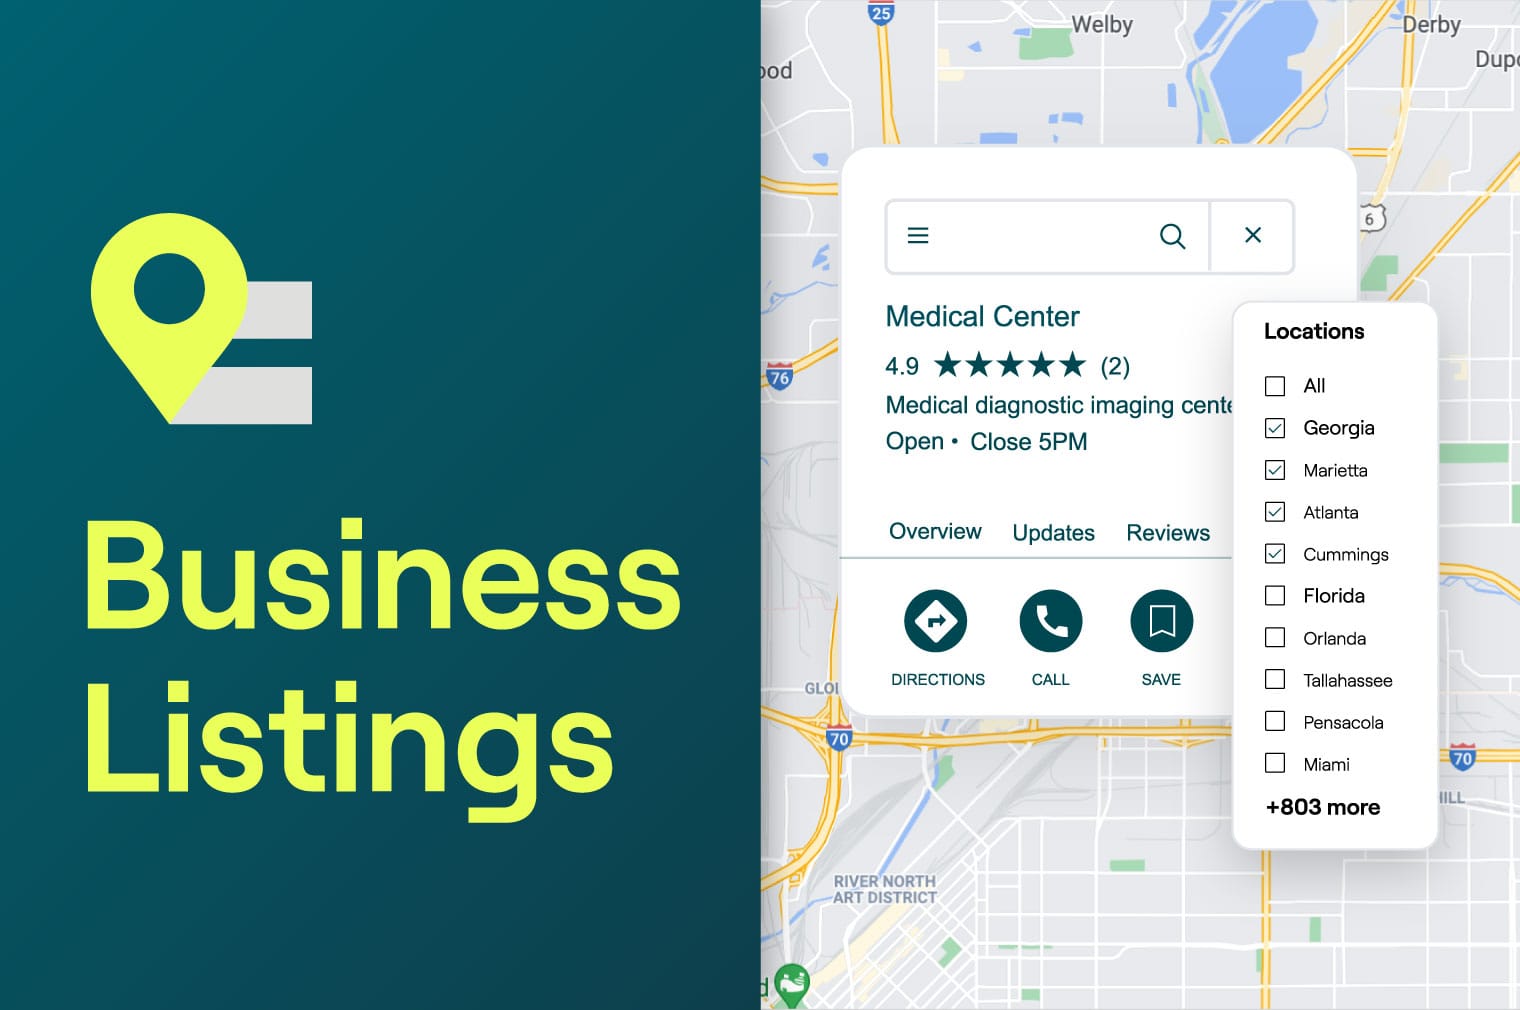 Business Listings by Reputation